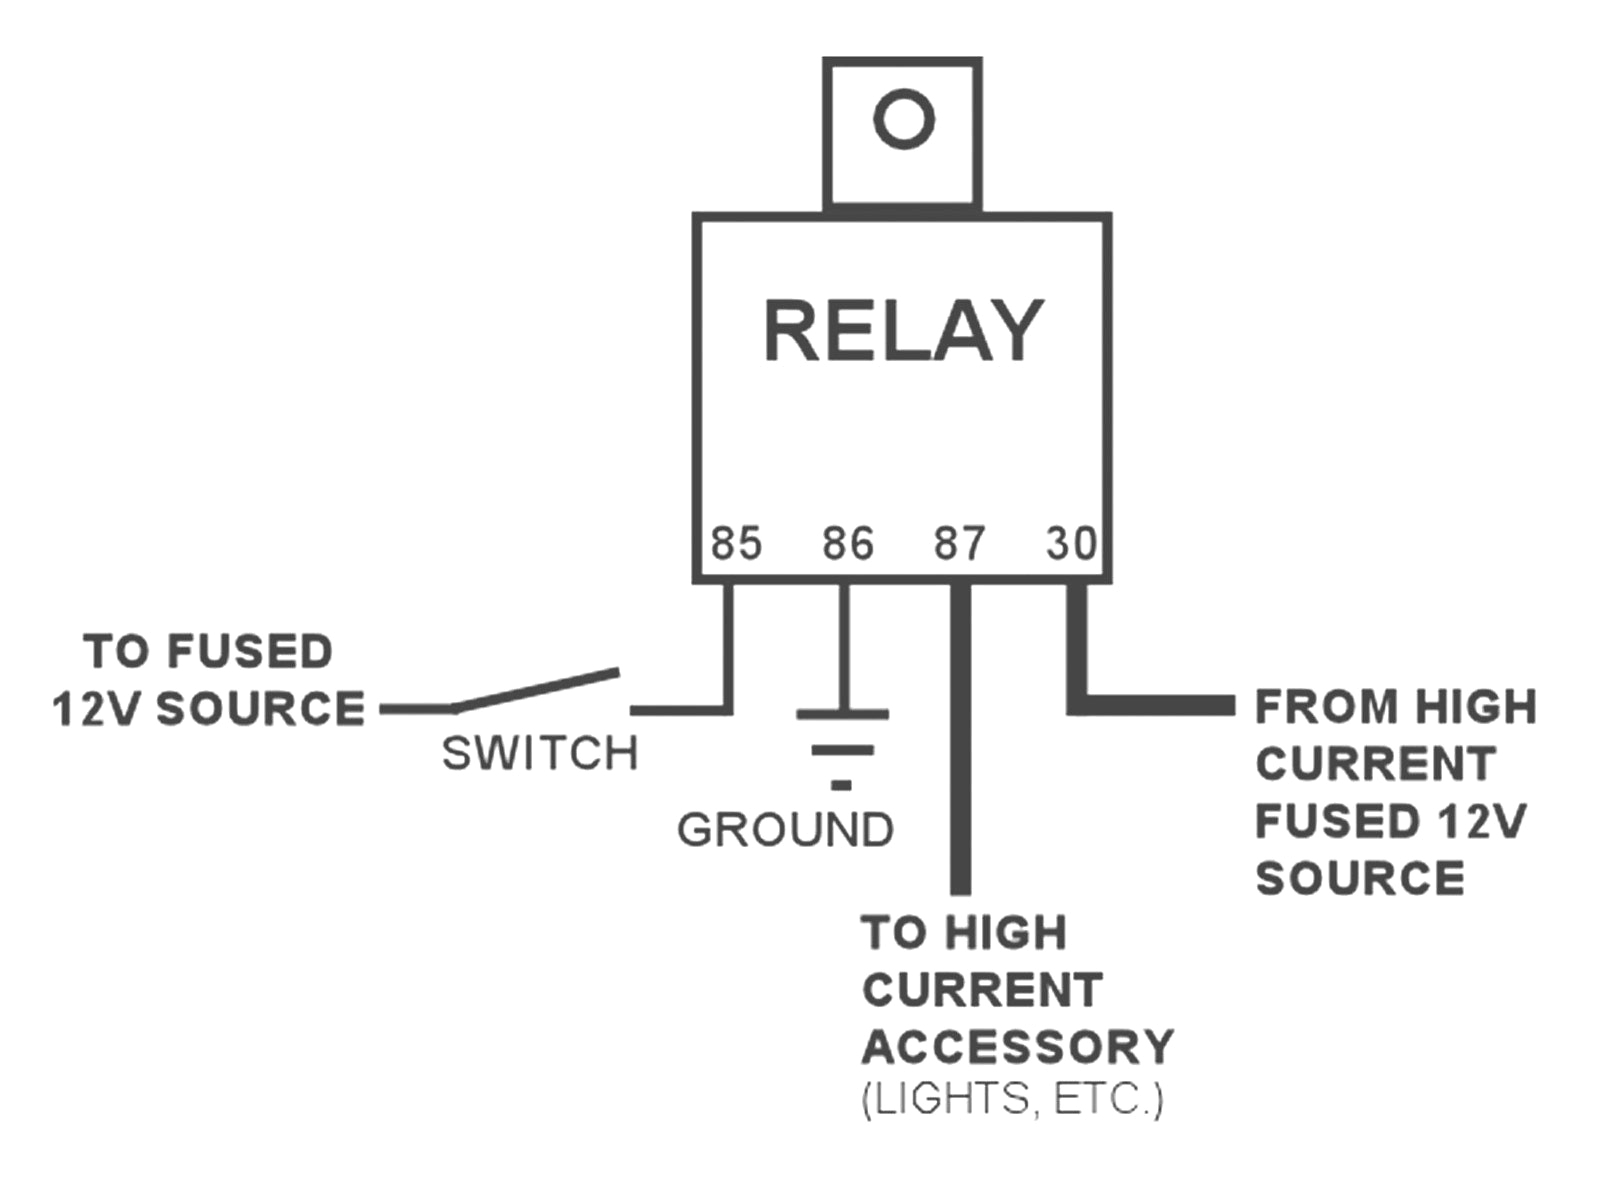 4 wire relay diagram wiring diagram files 4 pin relay wiring diagram fuel pump 4 wire relay diagram